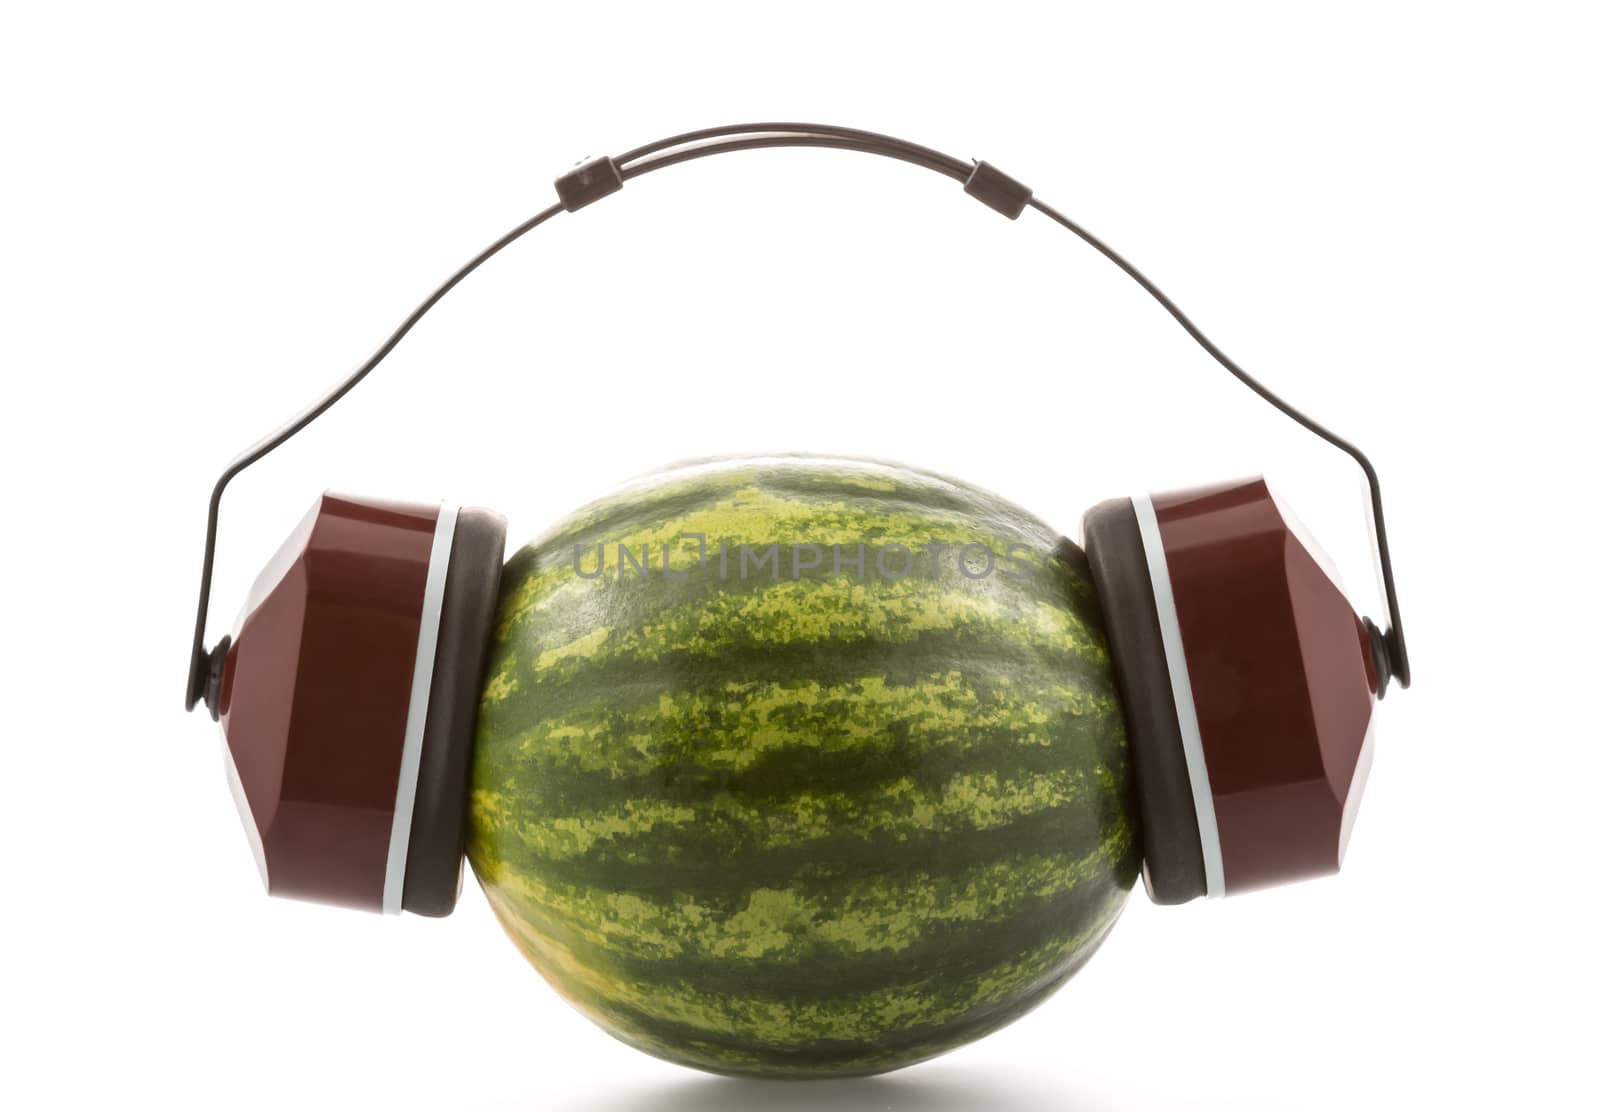 Industrial protective headphones on a melon, isolated on white background